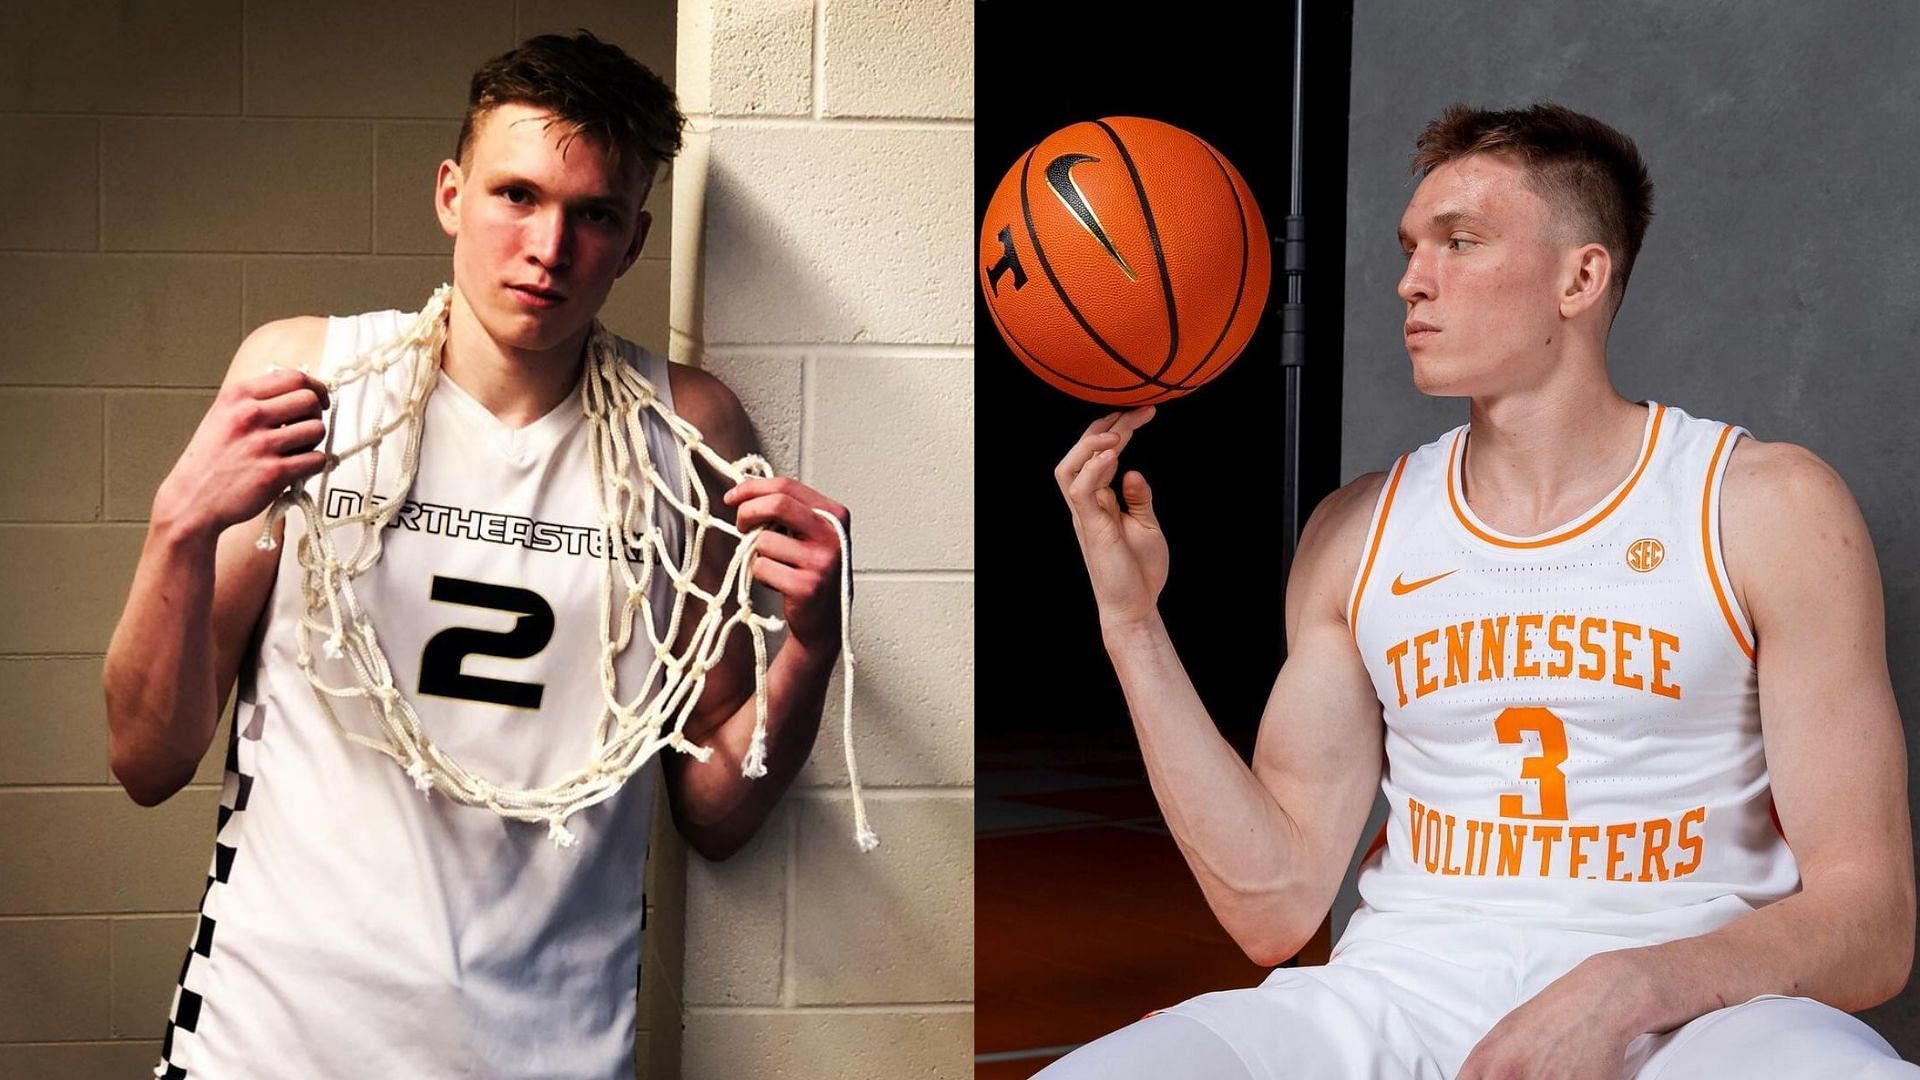 Dalton Knecht is expected to be a top-10 propect in the NBA Draft